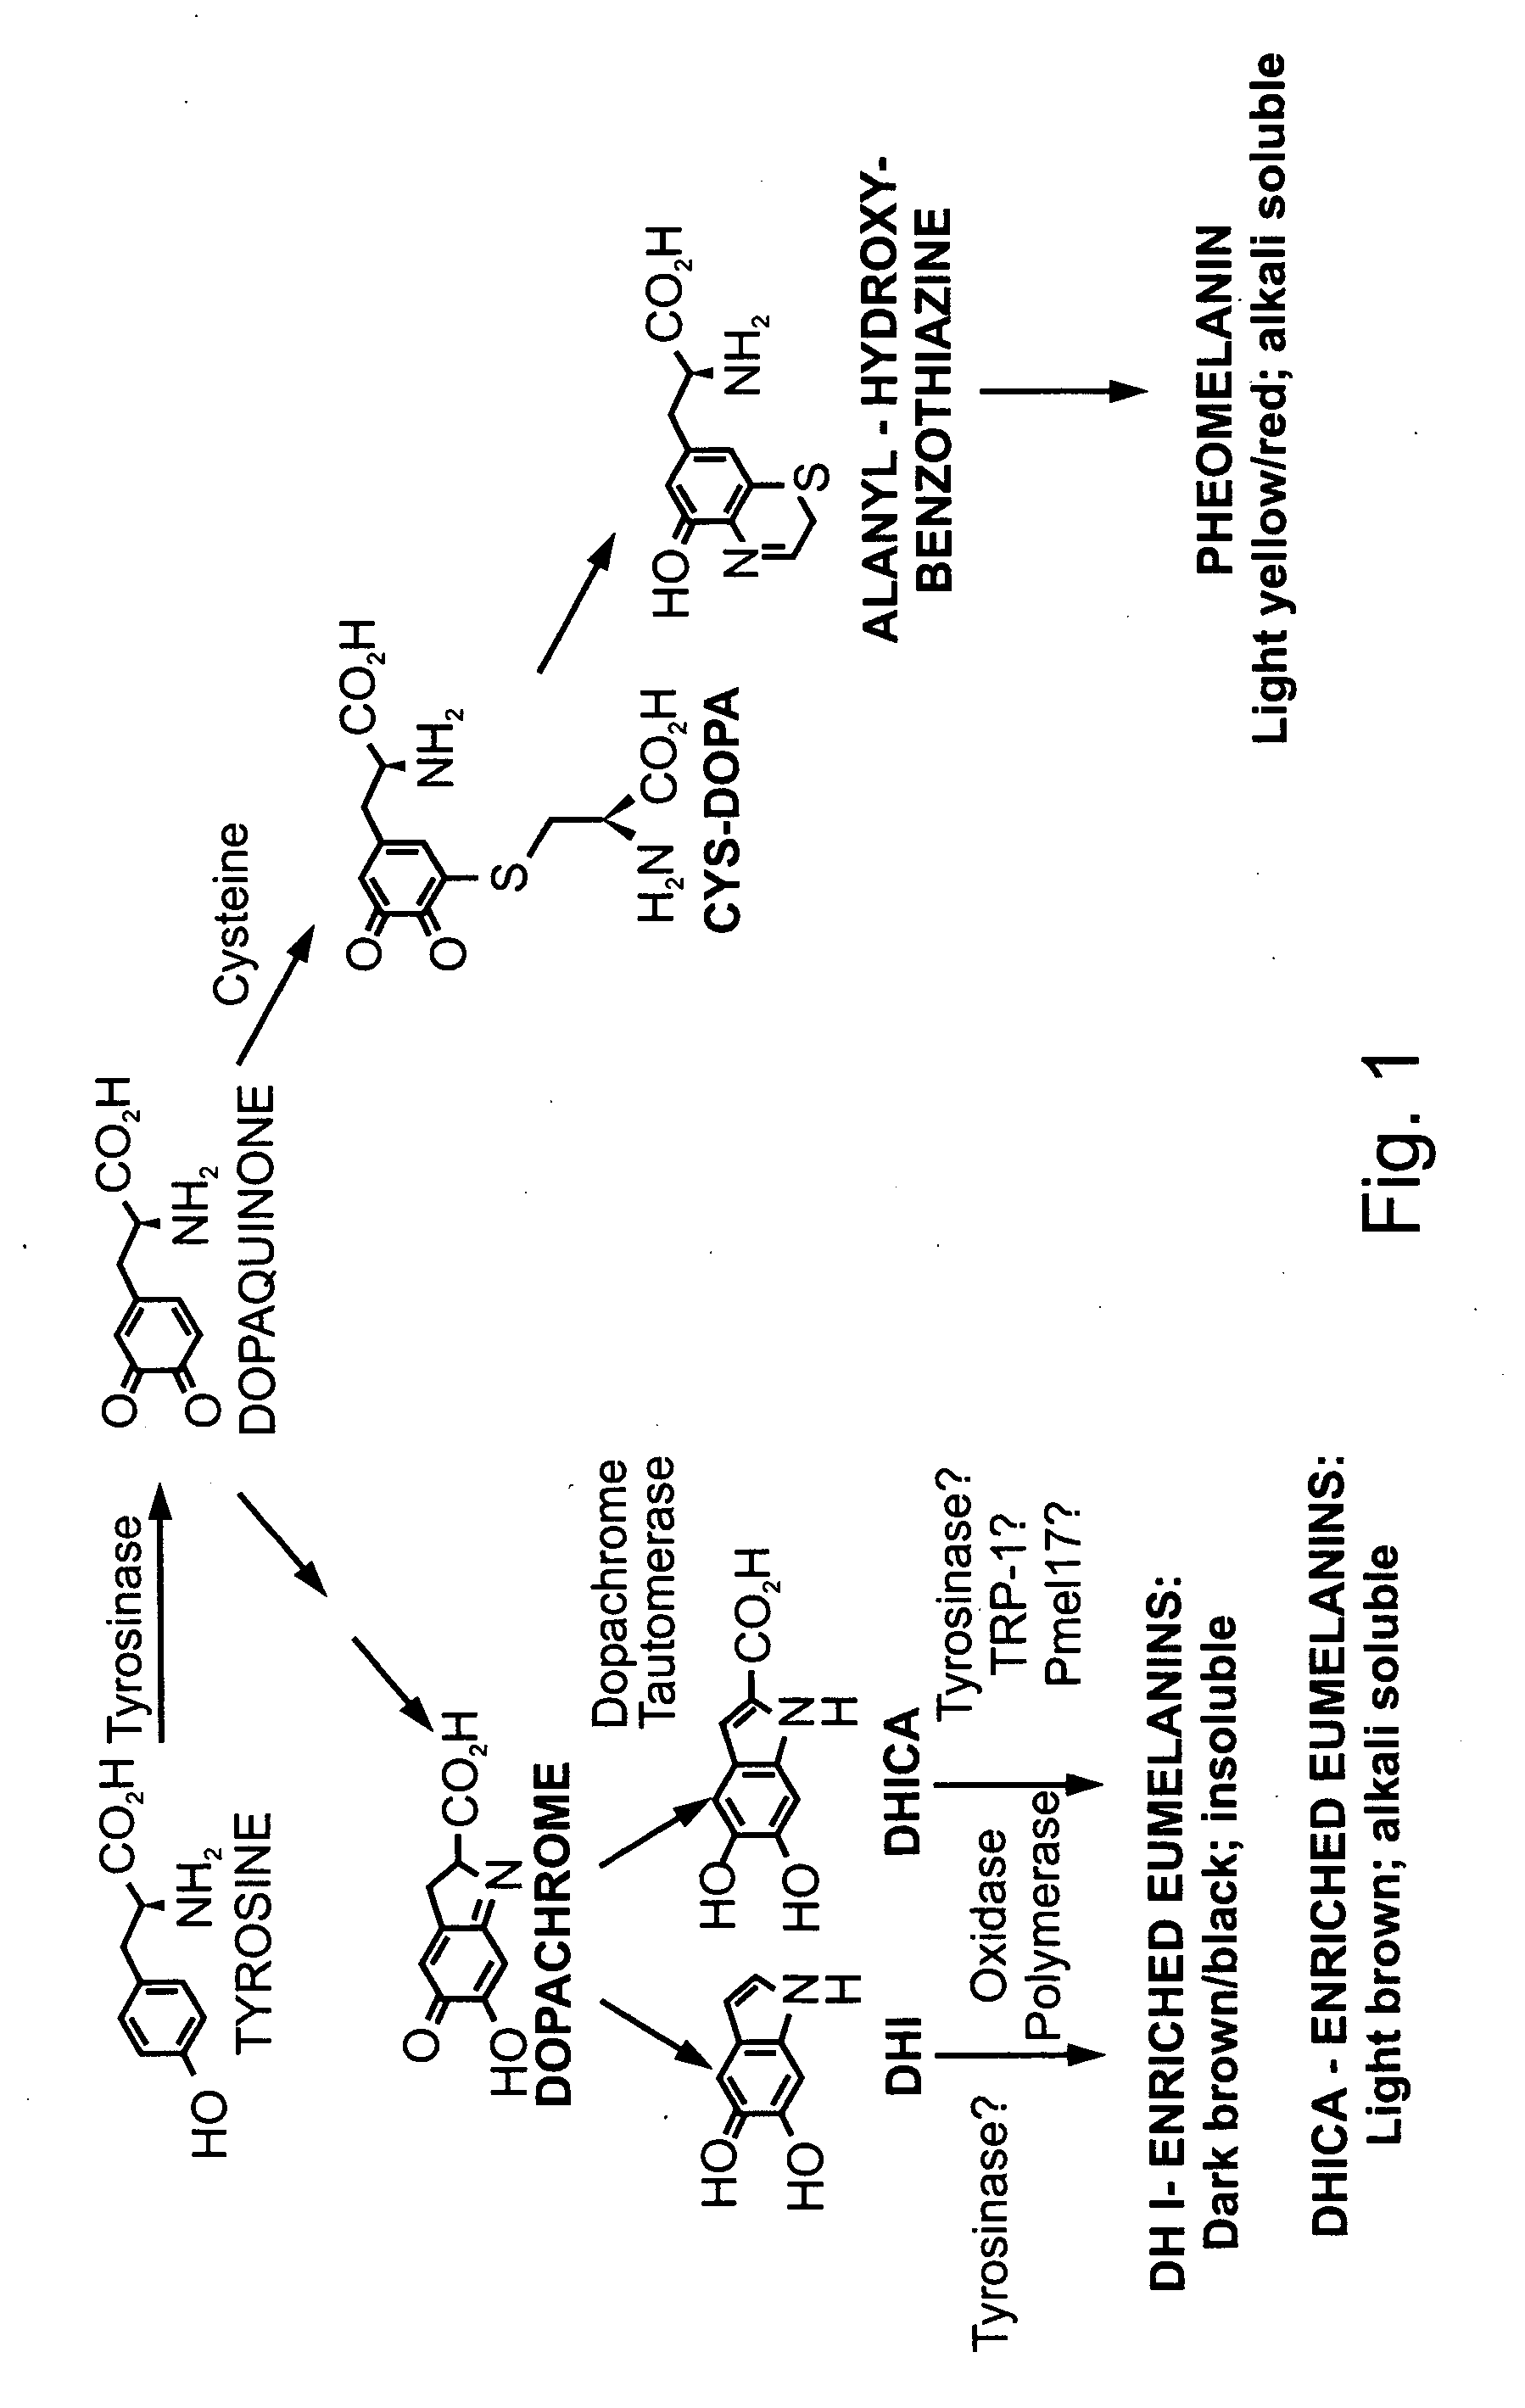 Methods of producing lignin peroxidase and its use in skin and hair lightening